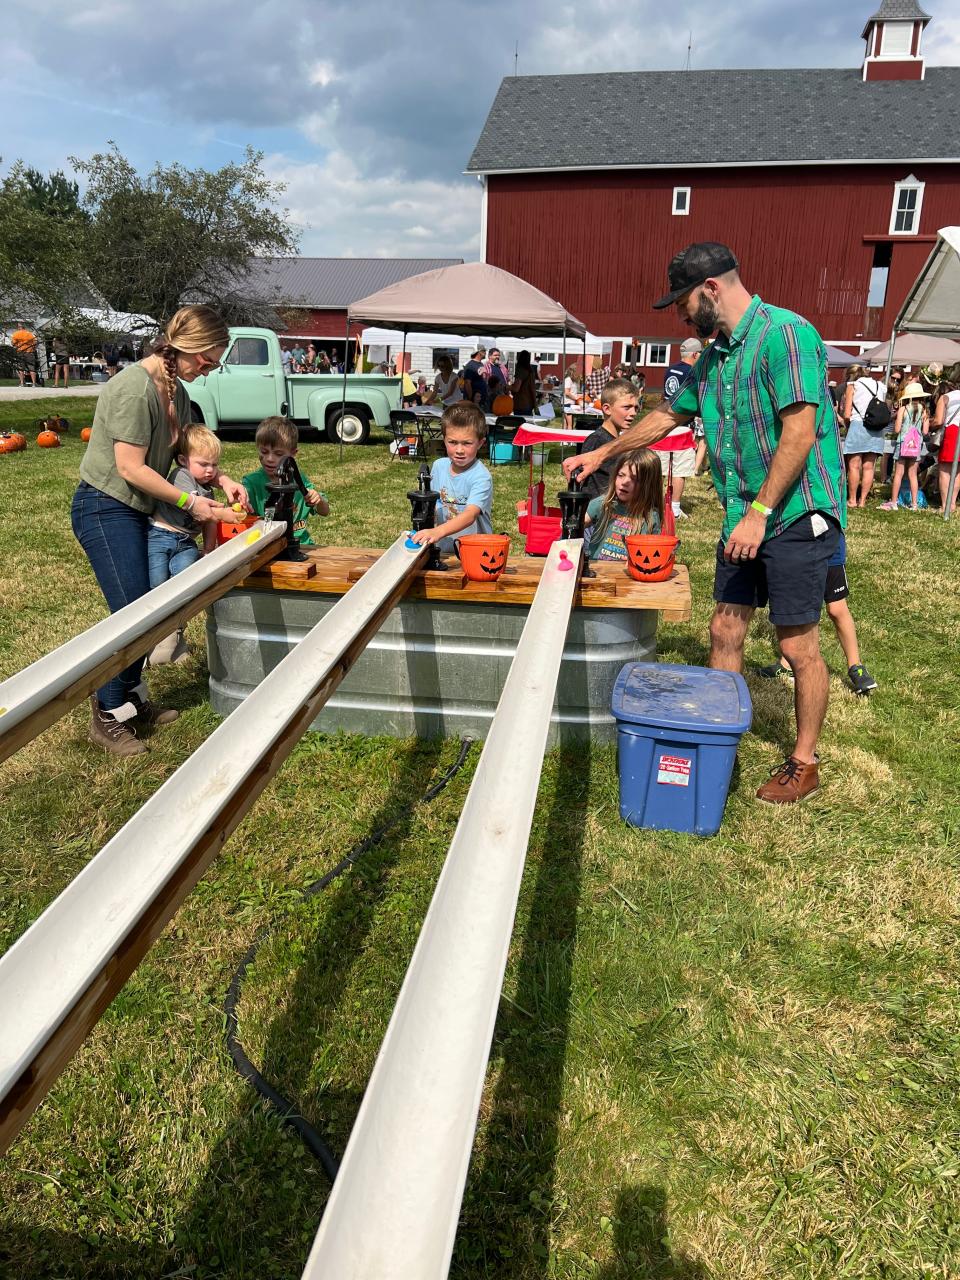 Case-Barlow Farm's annual fall festival includes several family activities, such as plastic duck racing.